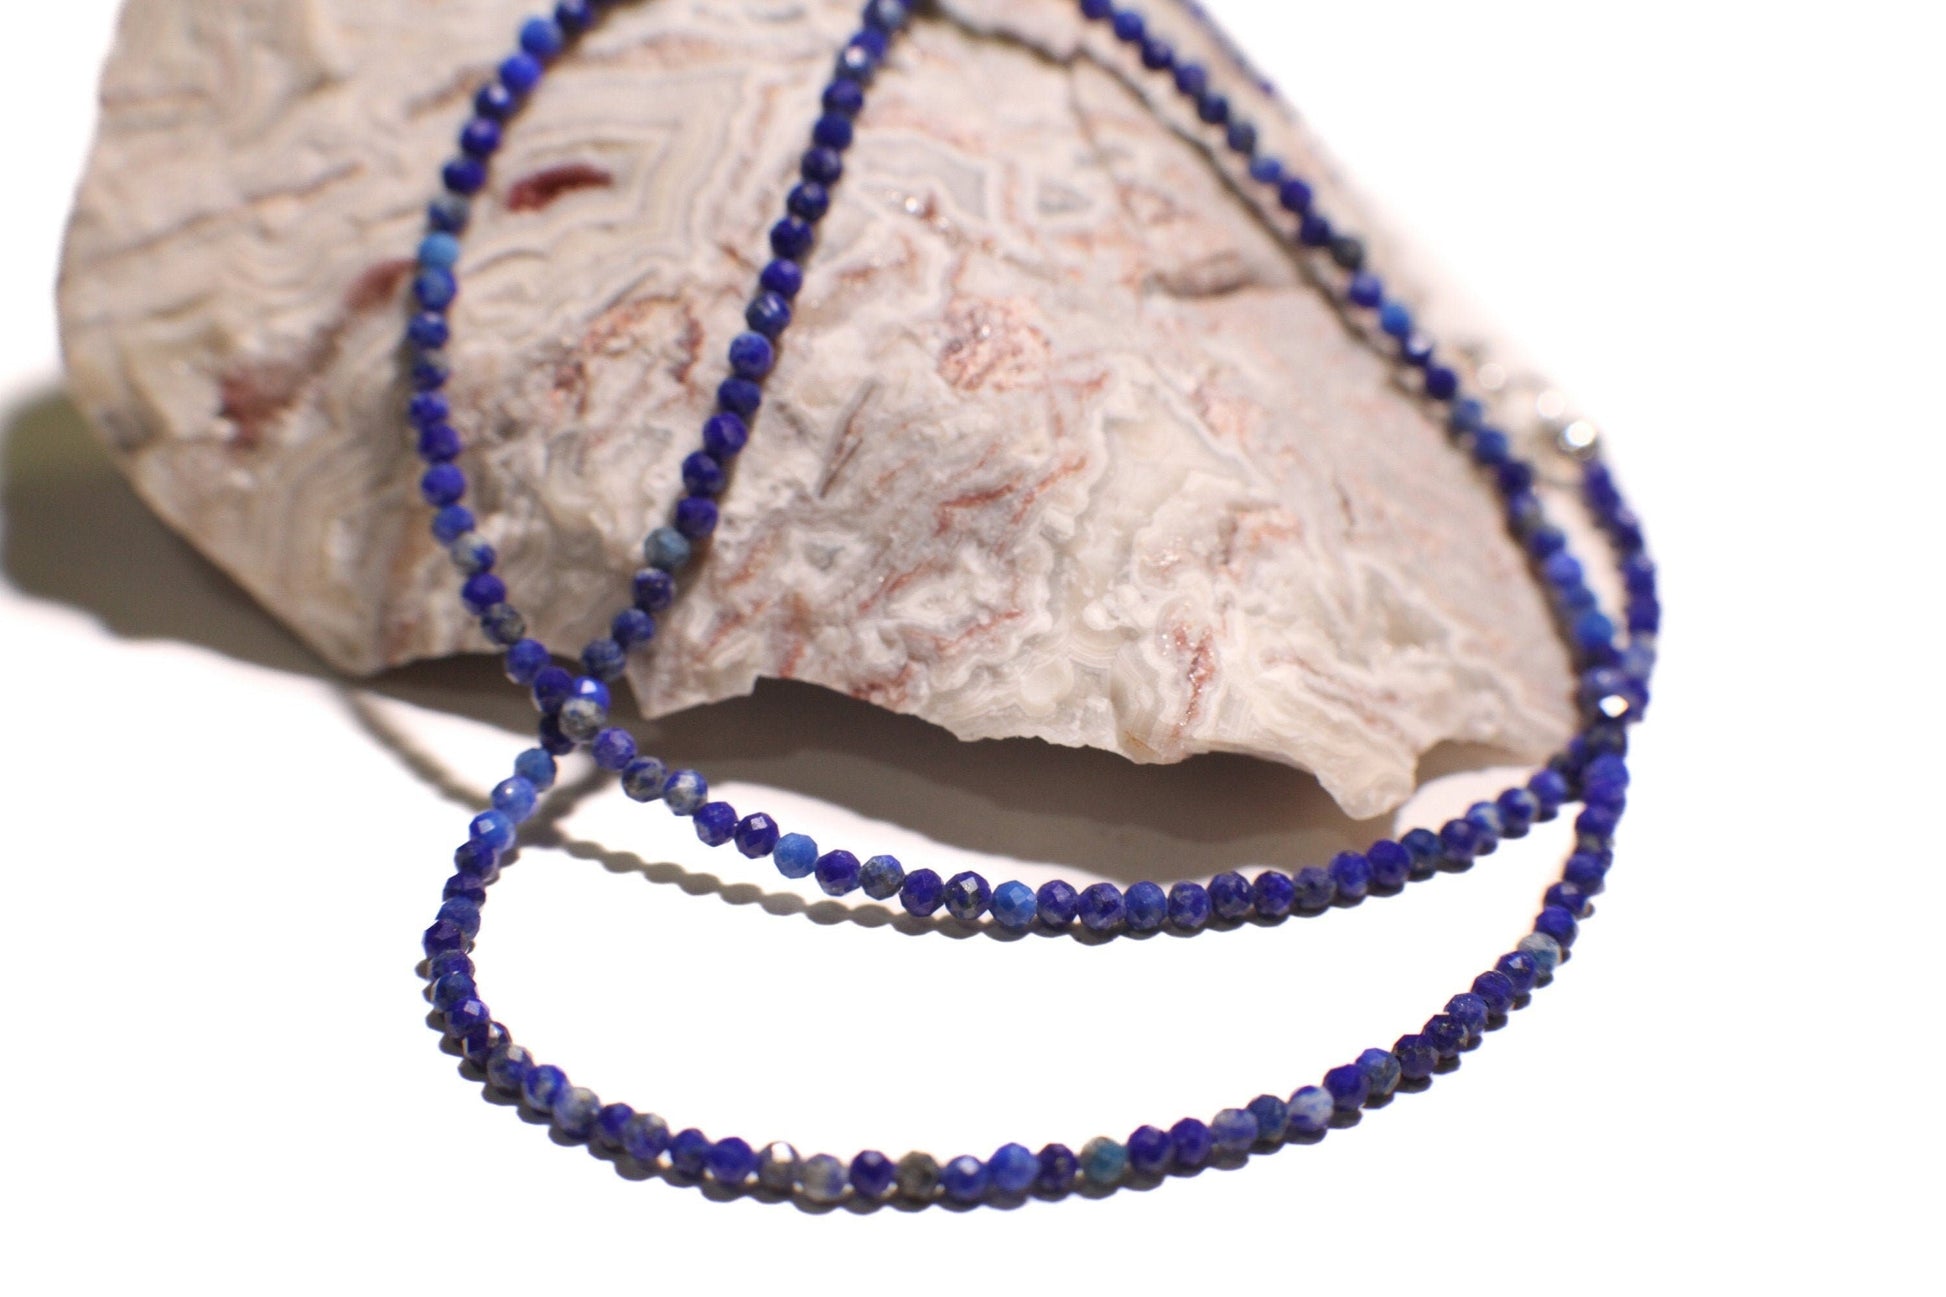 2-3mm Faceted Lapis Lazuli, Green Onyx, Garnet, Bamboo Coral Layering Choker 925 Sterling Silver Necklace, Precious Gemstone